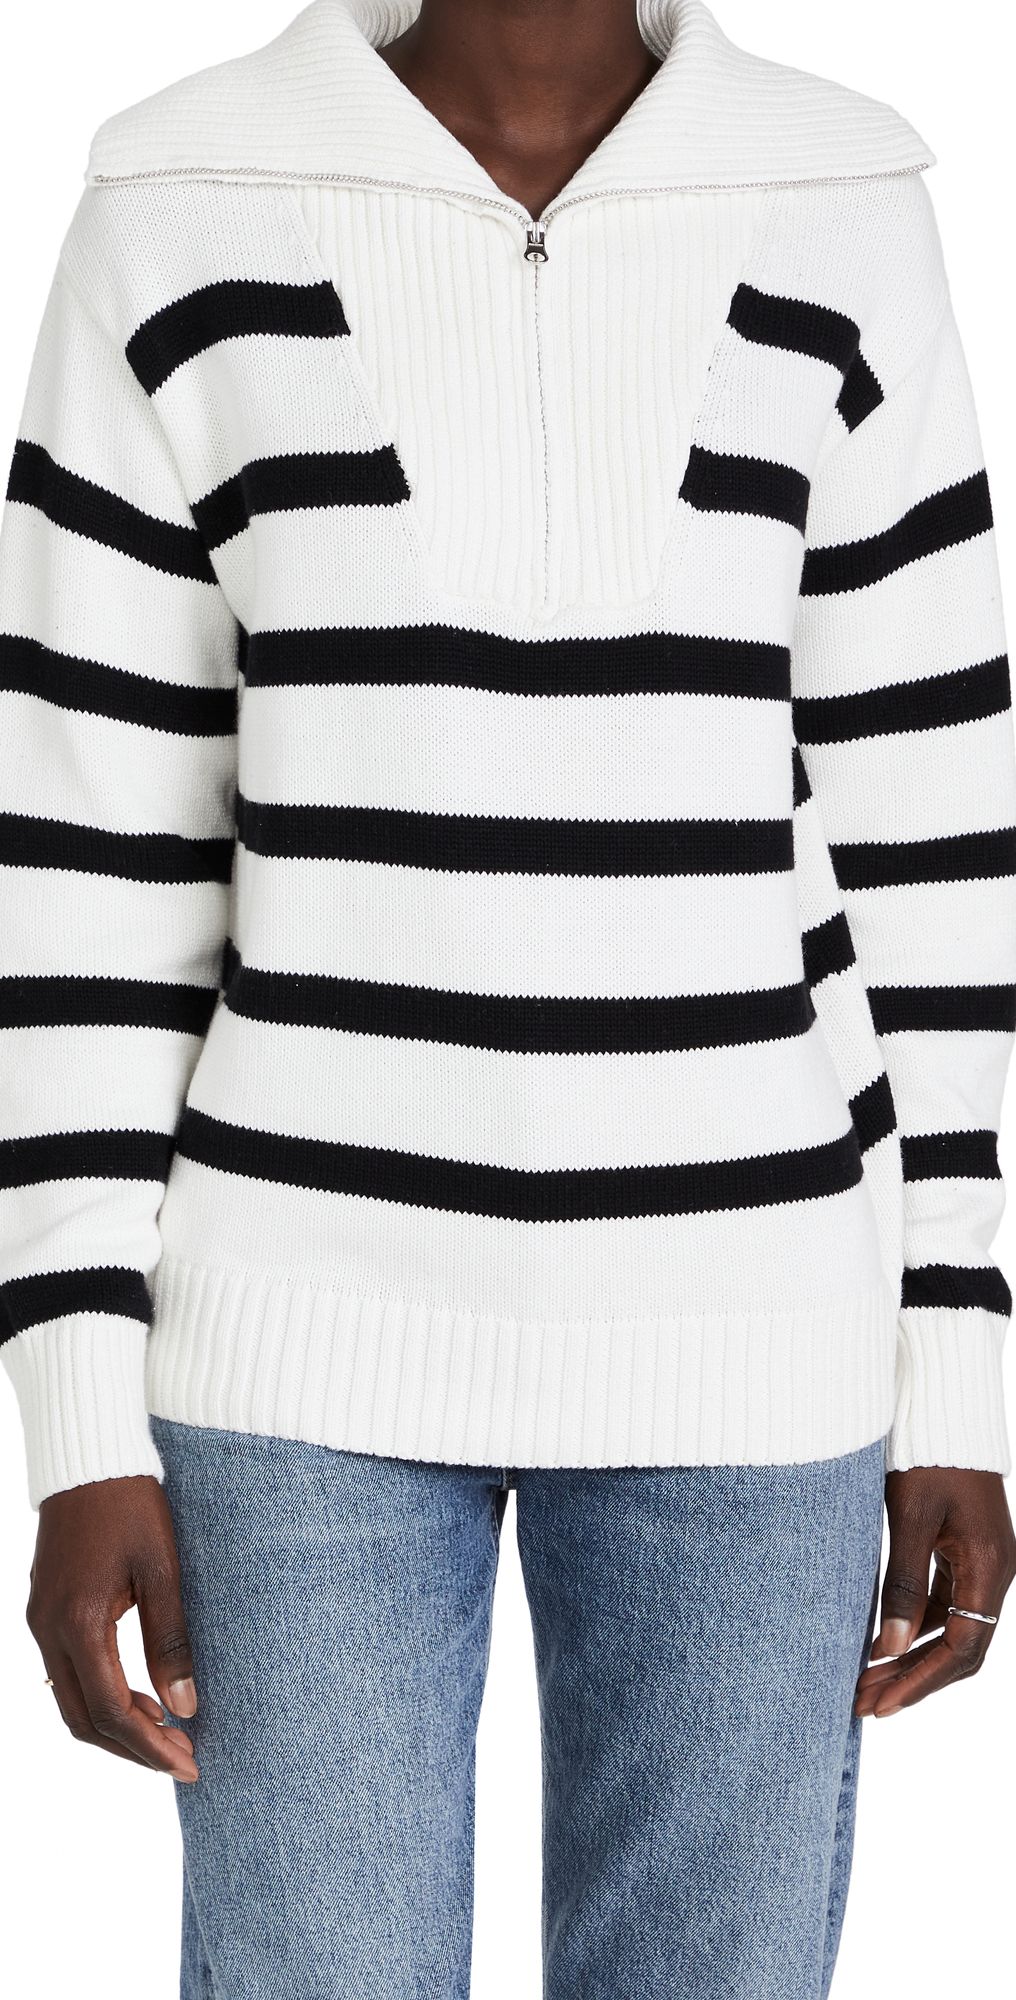 Striped Knit Zip Pullover | Shopbop